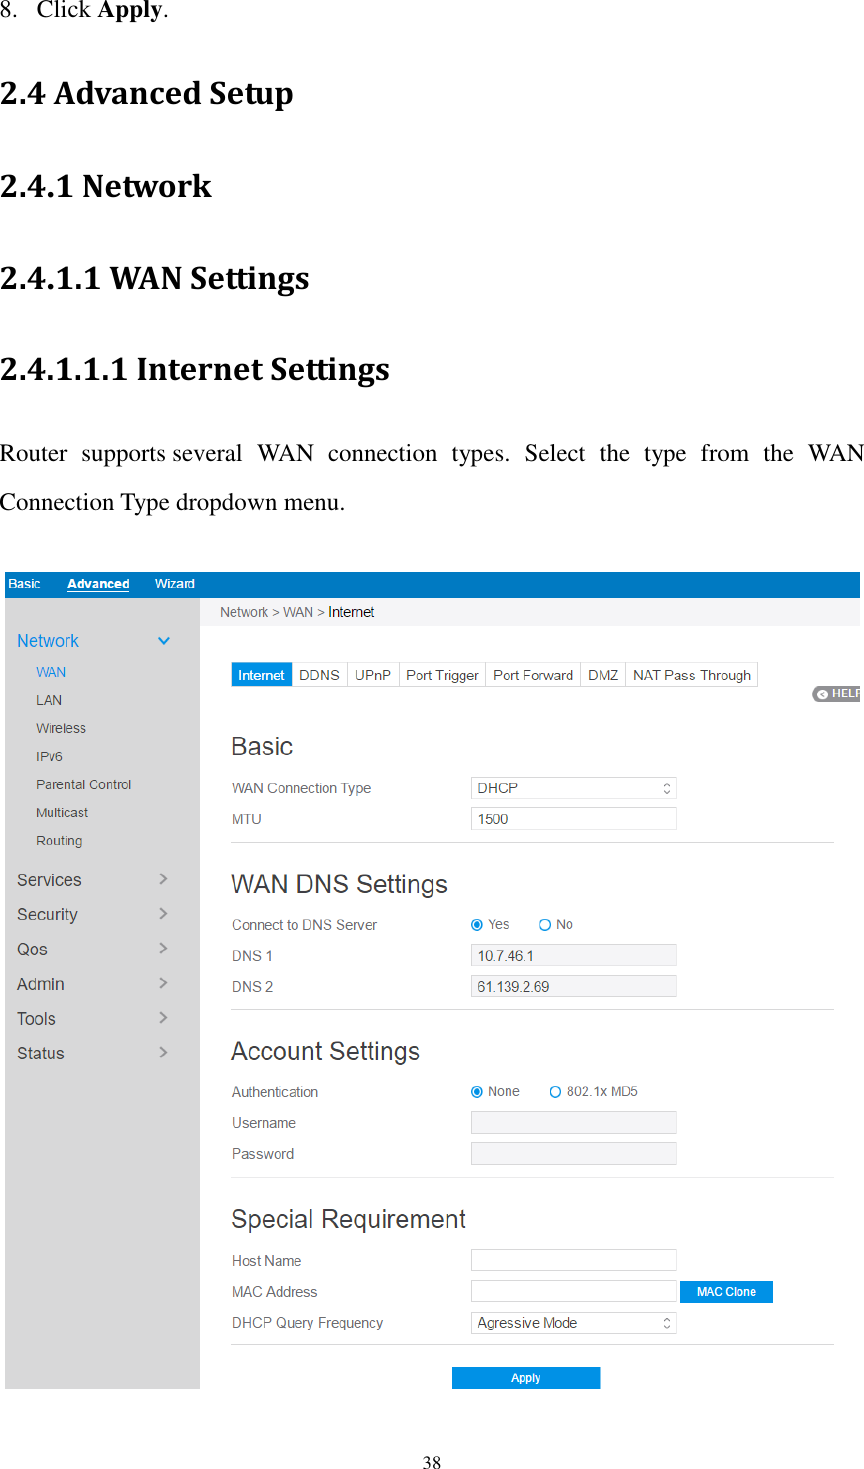  38 8. Click Apply. 2.4 Advanced Setup 2.4.1 Network 2.4.1.1 WAN Settings 2.4.1.1.1 Internet Settings Router  supports several  WAN  connection  types.  Select  the  type  from  the  WAN Connection Type dropdown menu.    